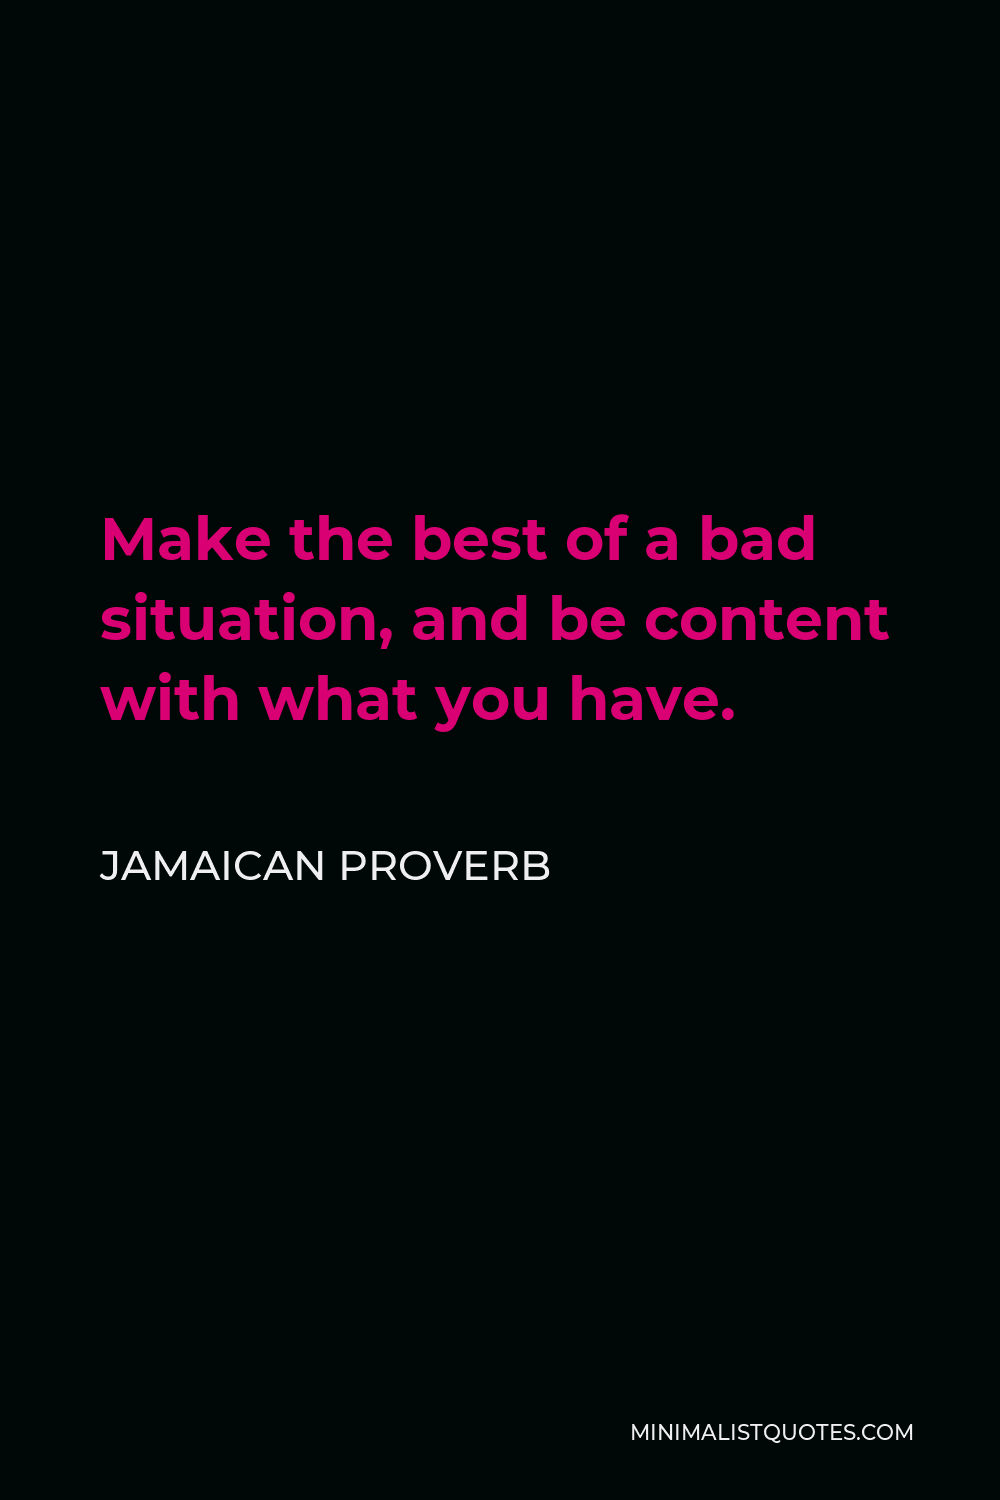 Jamaican Proverb Quote - Make the best of a bad situation, and be content with what you have.